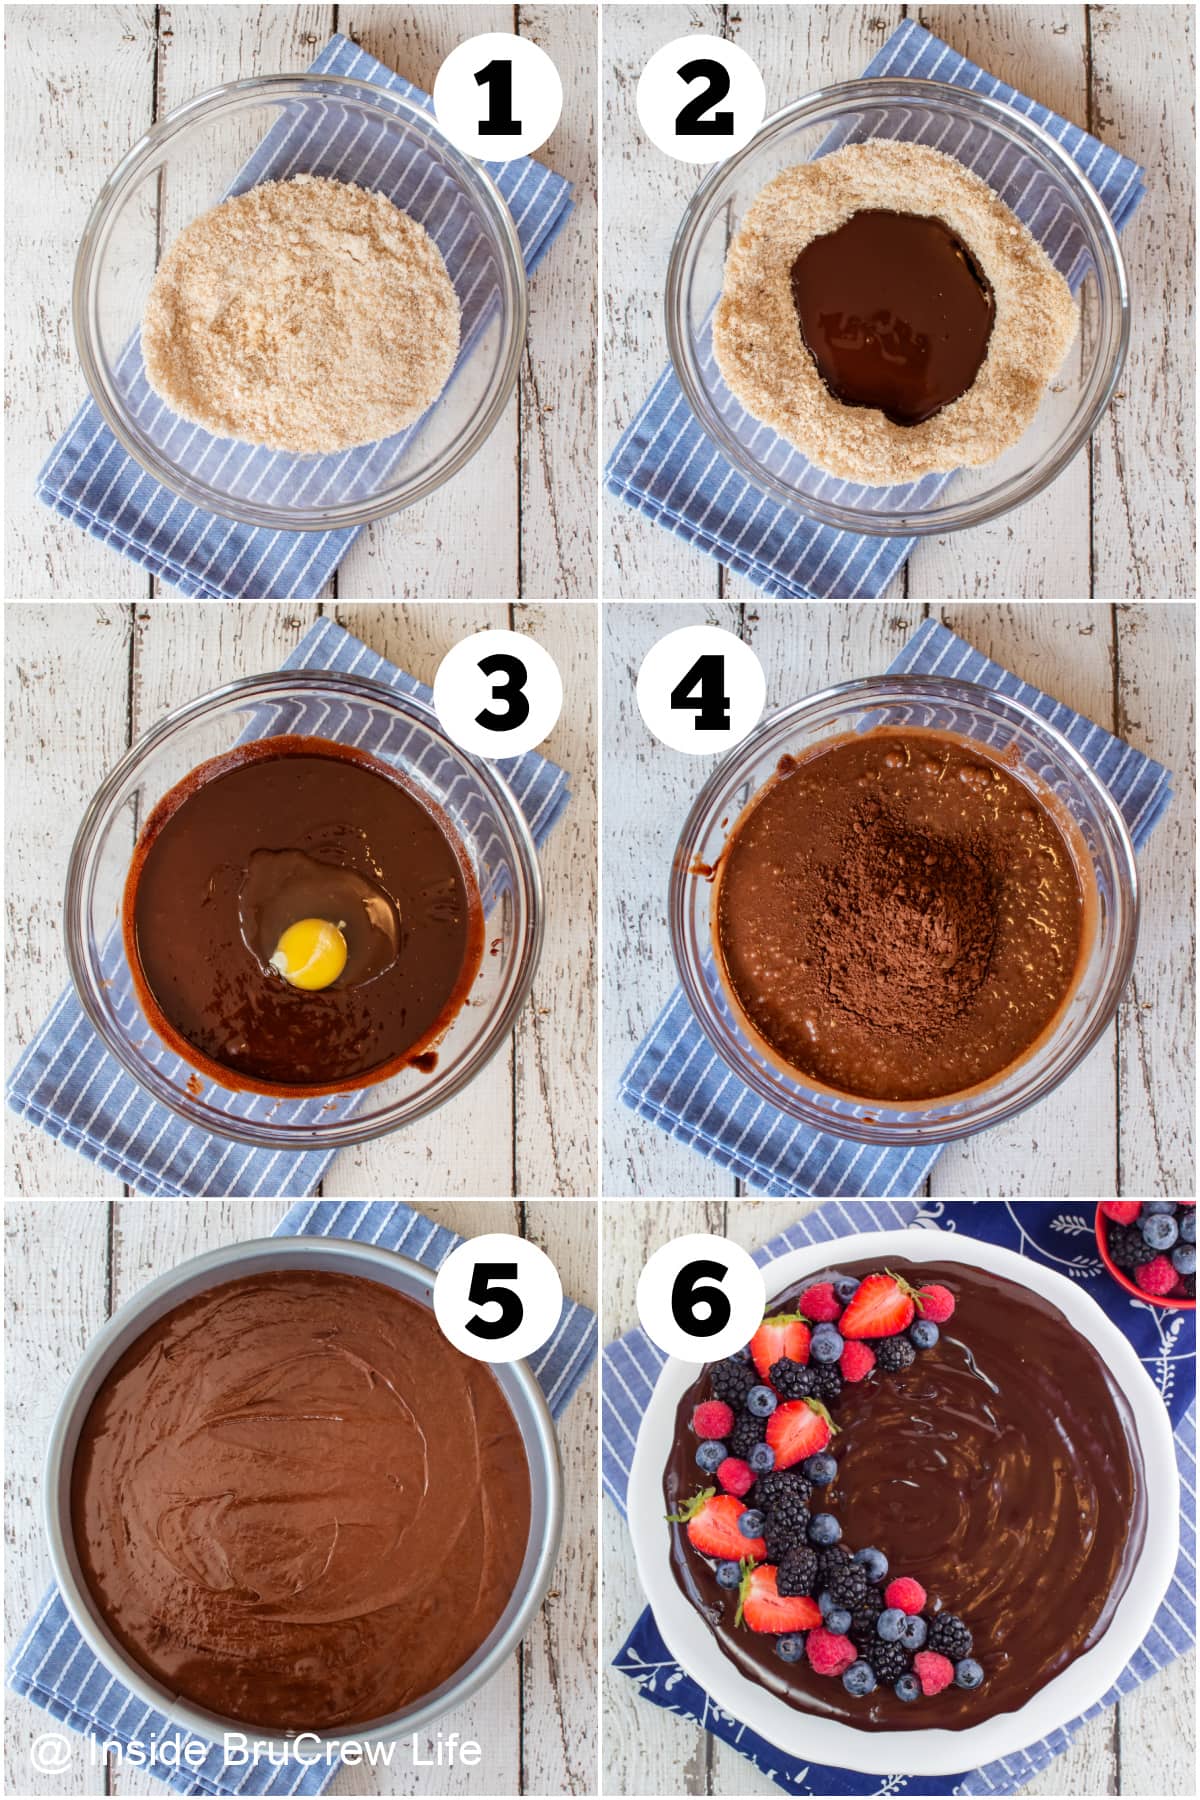 Six pictures collaged together showing how to make a cake without flour.